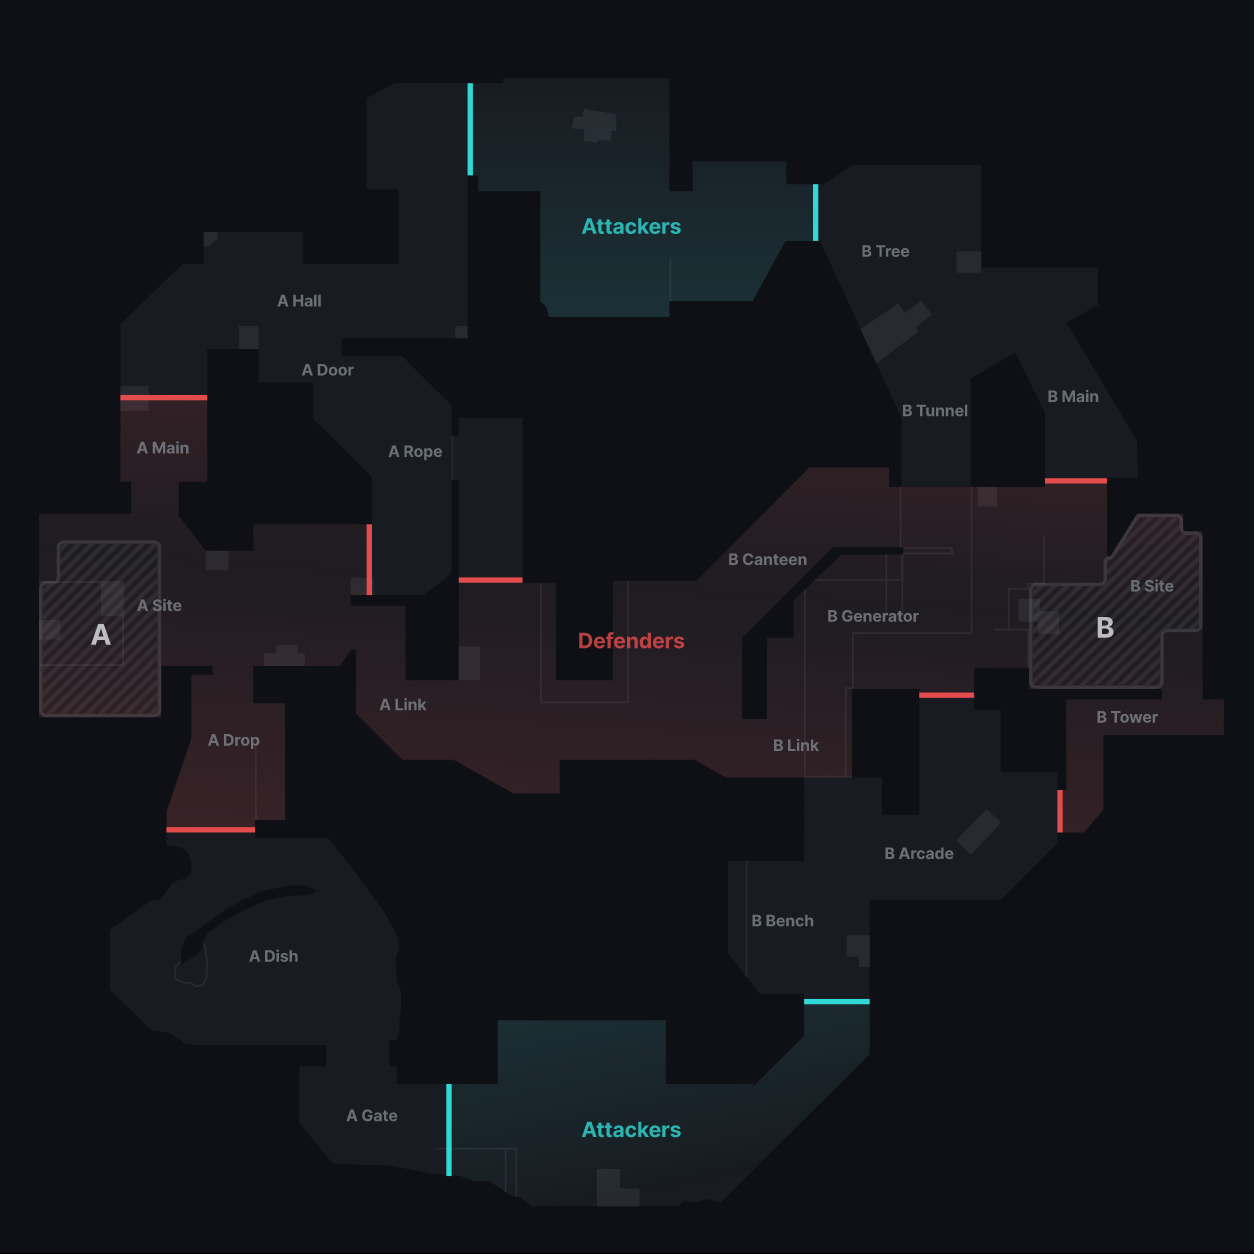 Valorant Bind Map Guide - Layout, Callouts & Tips - Valorant Info